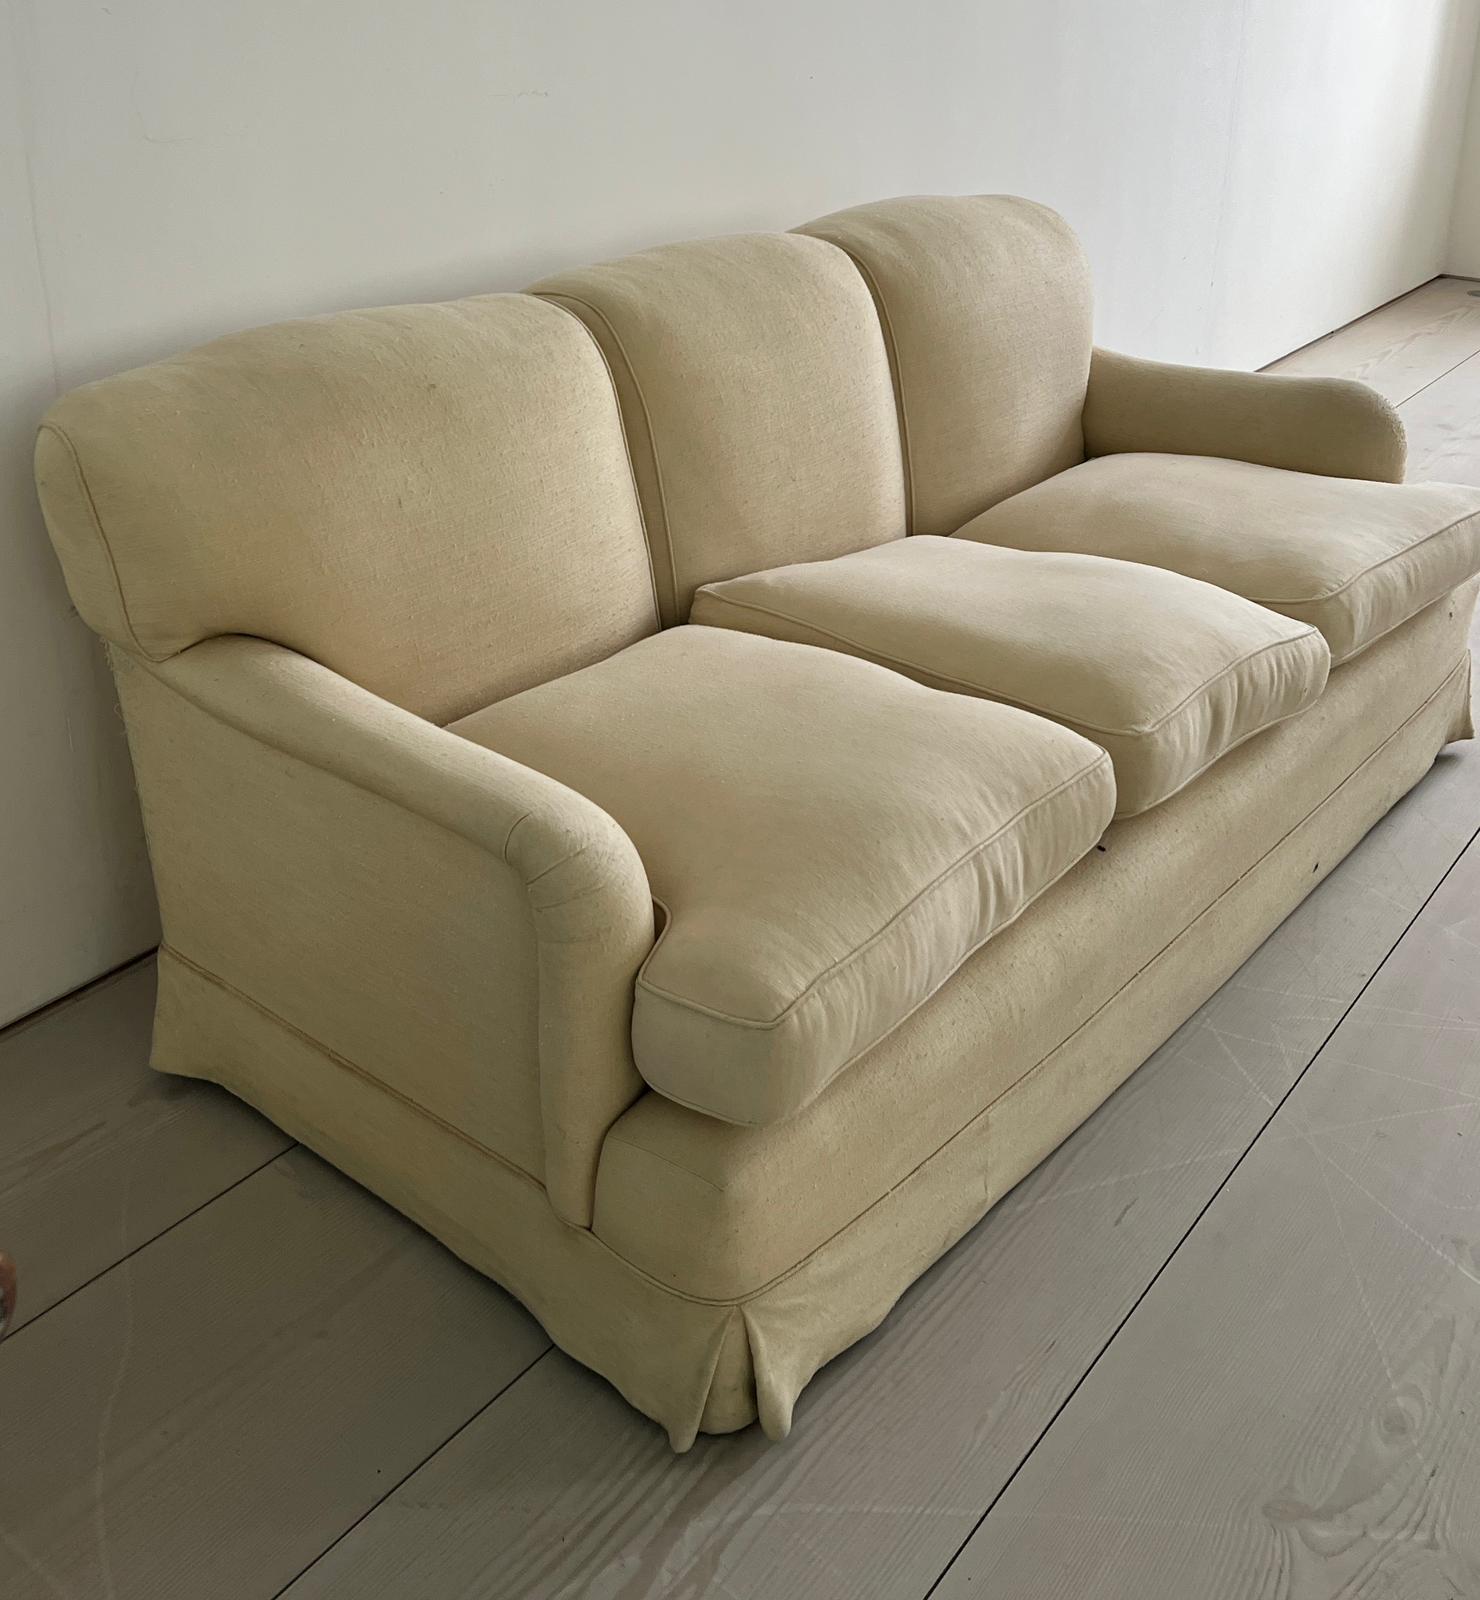 Three seater sofa by Peter Dudgeon (W207cm D86cm) - Image 3 of 3